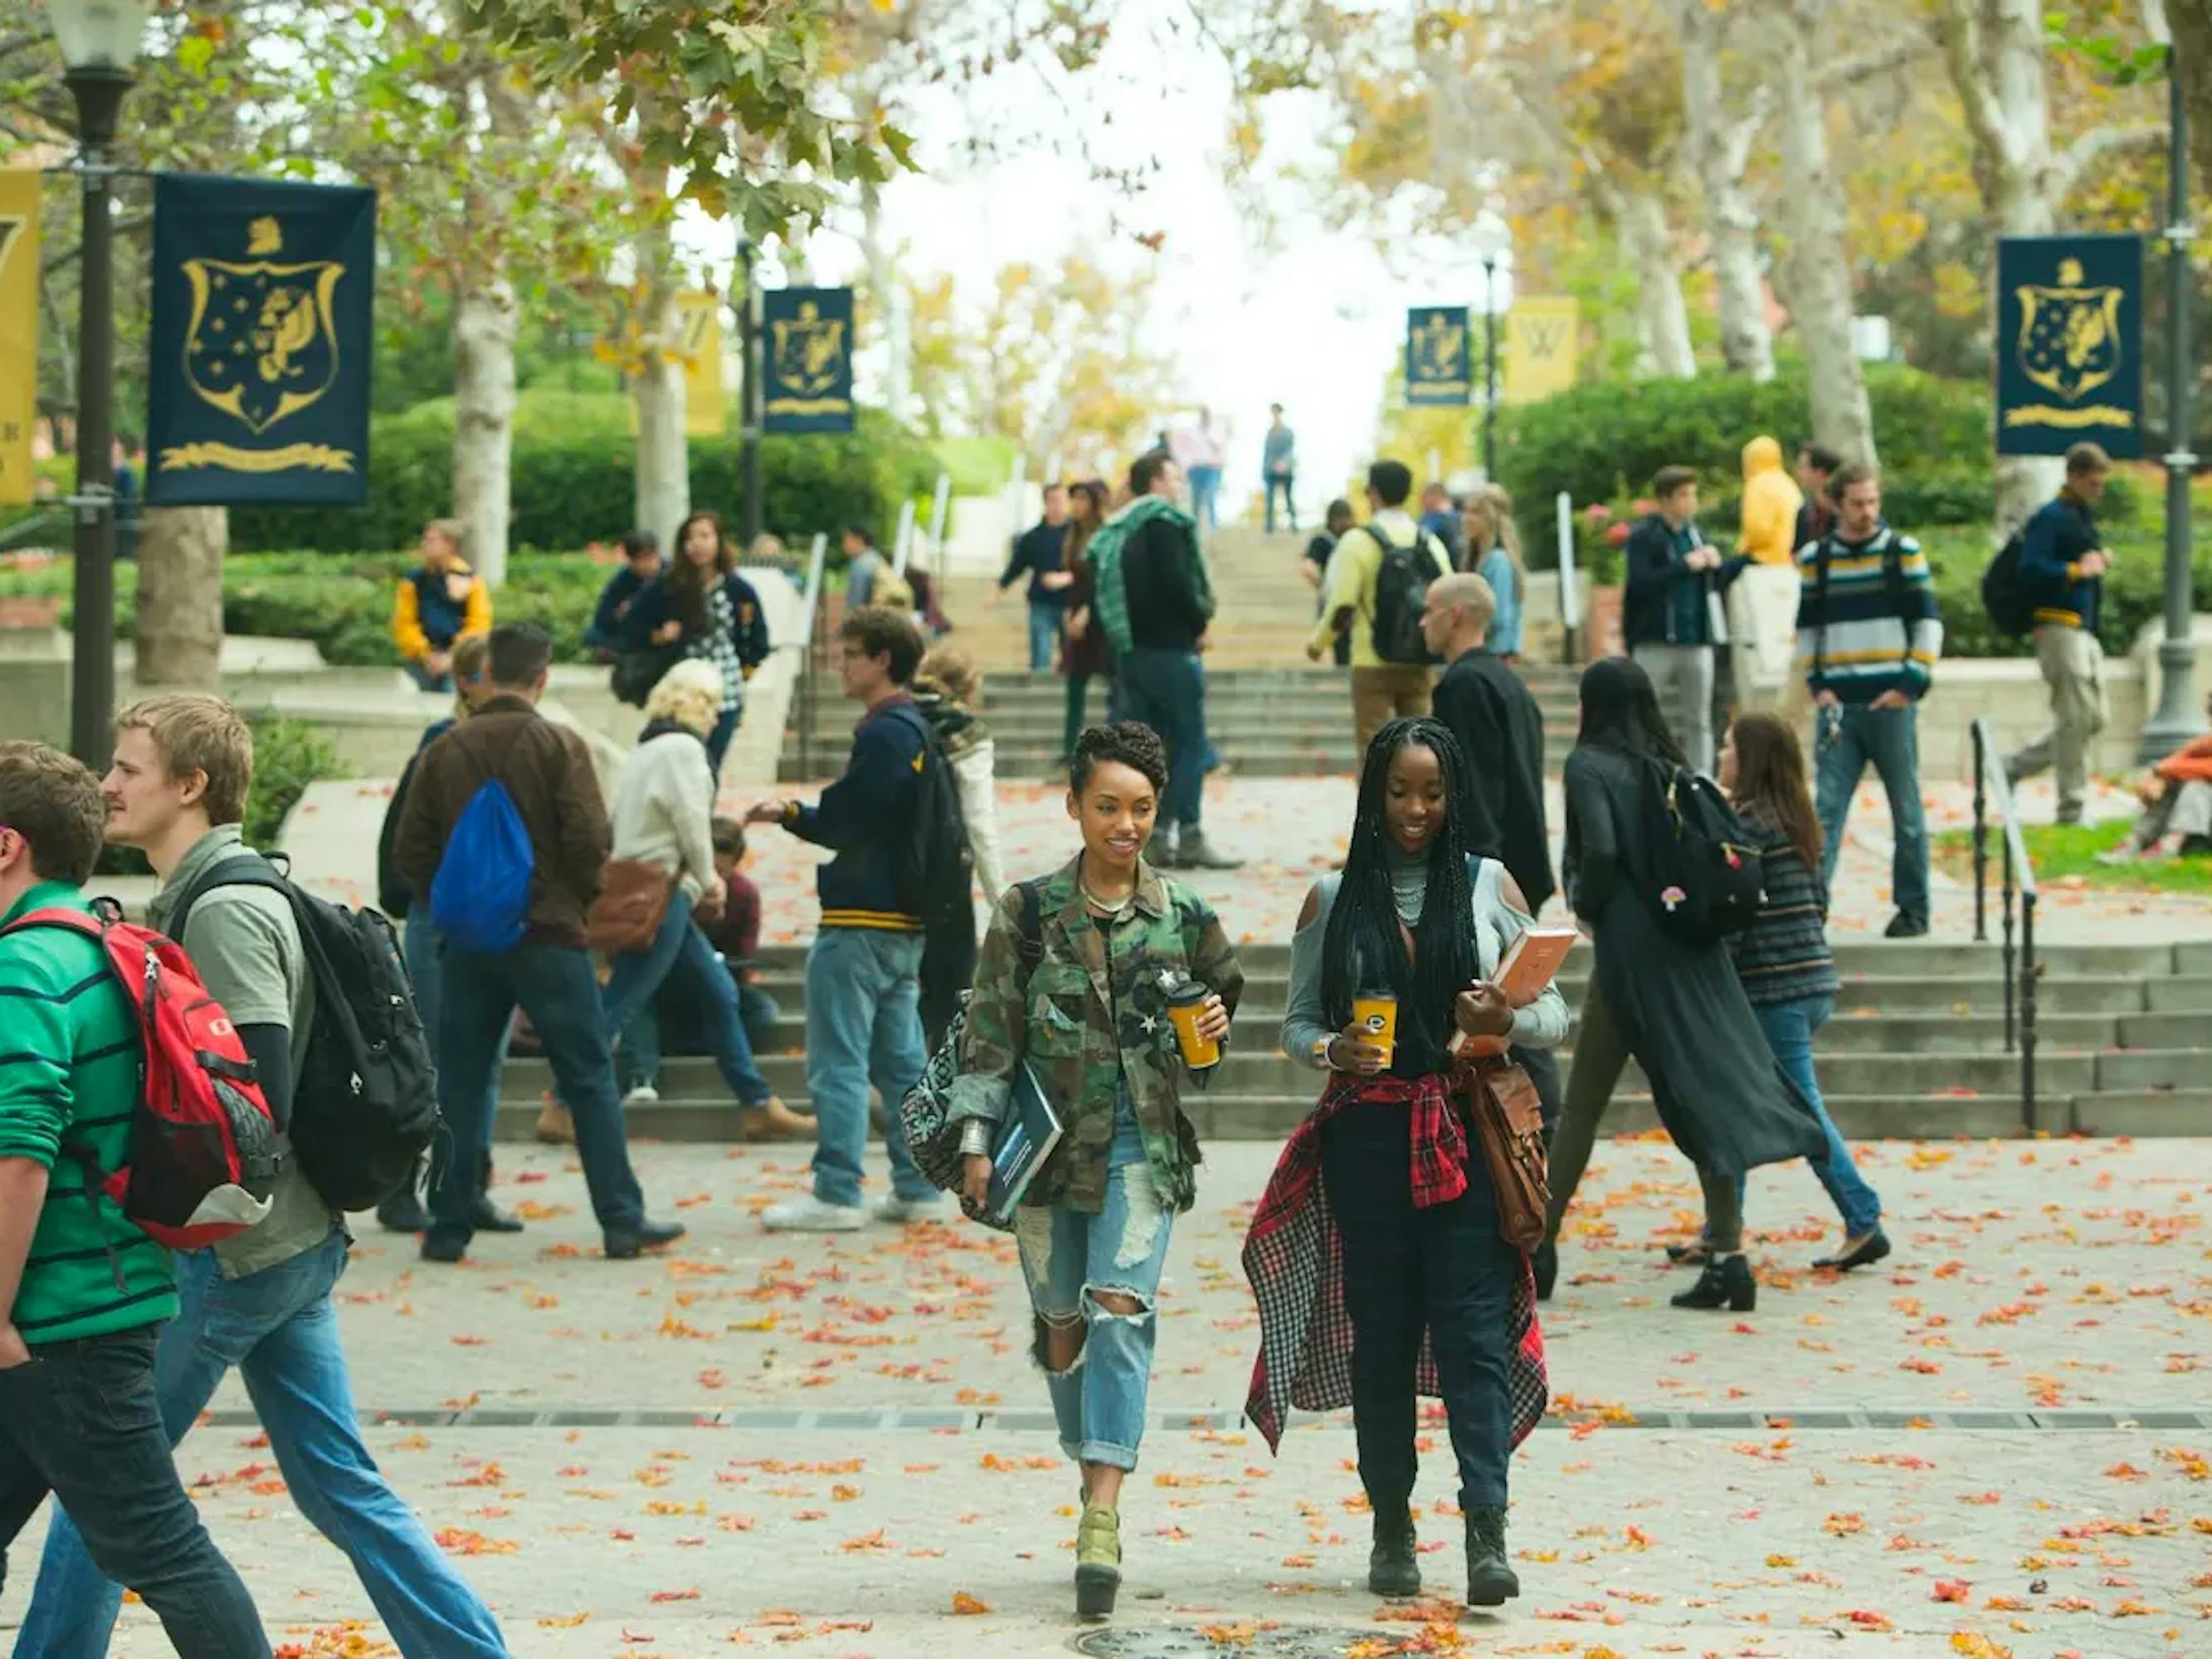 Sam White (Logan Browning) and Joelle Brooks (Ashley Blaine Featherson) walk through a collegial scene. There are leaves on the ground and students walking through. The two hold coffee and carry books.